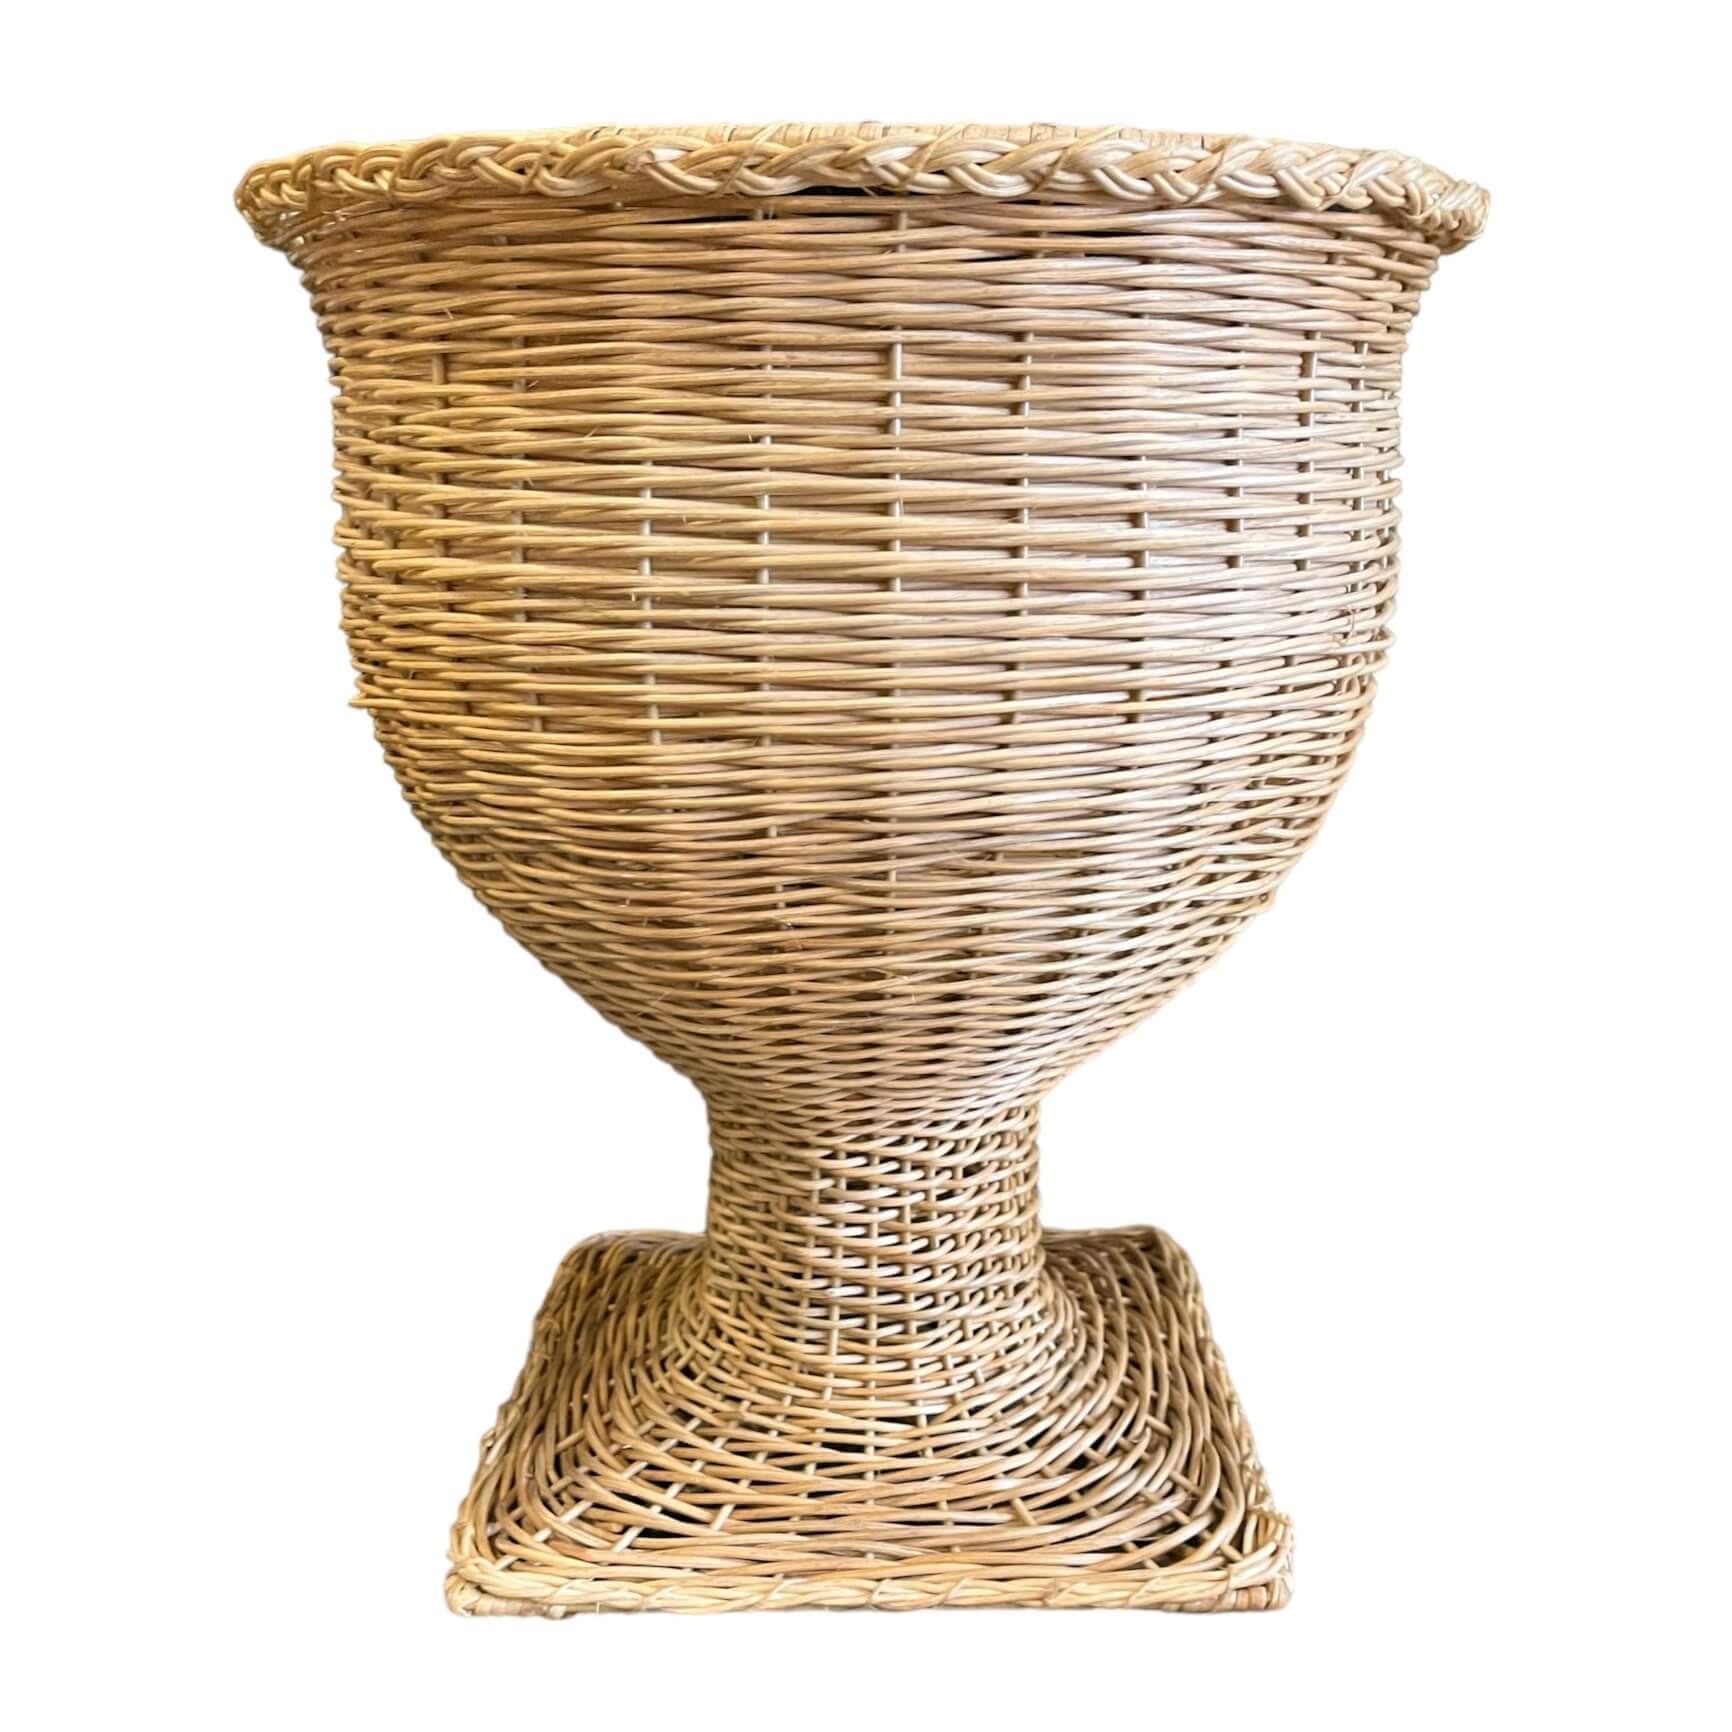 17" Wicker Urn with Square Base